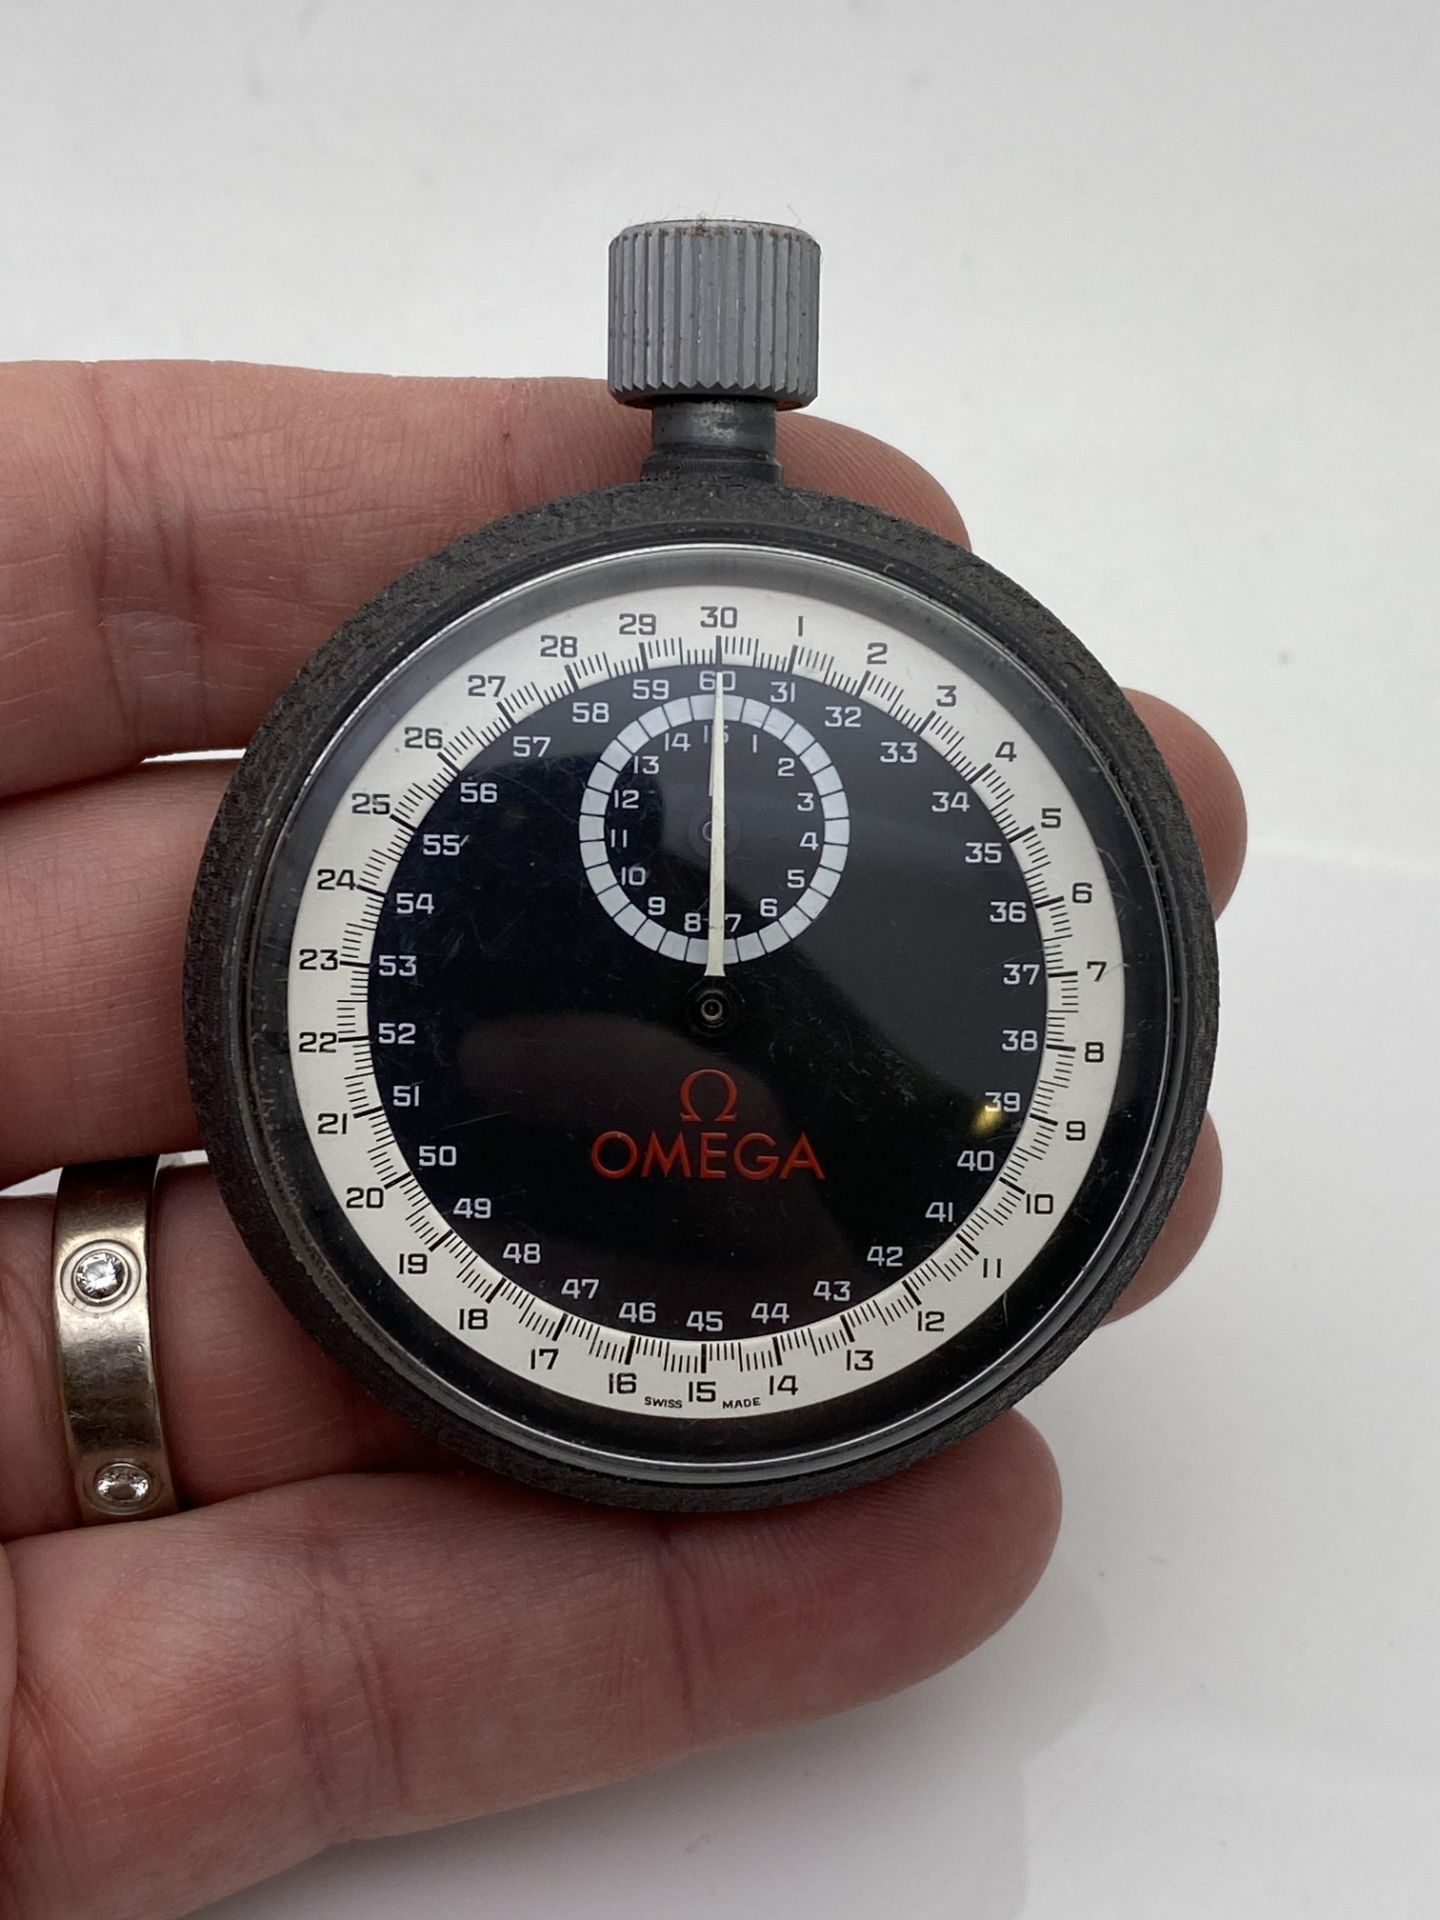 OMEGA RARE LIMITED PRODUCTION STOPWATCH, INCLUDES ORIGINAL BOOKLET (350) - Image 3 of 4